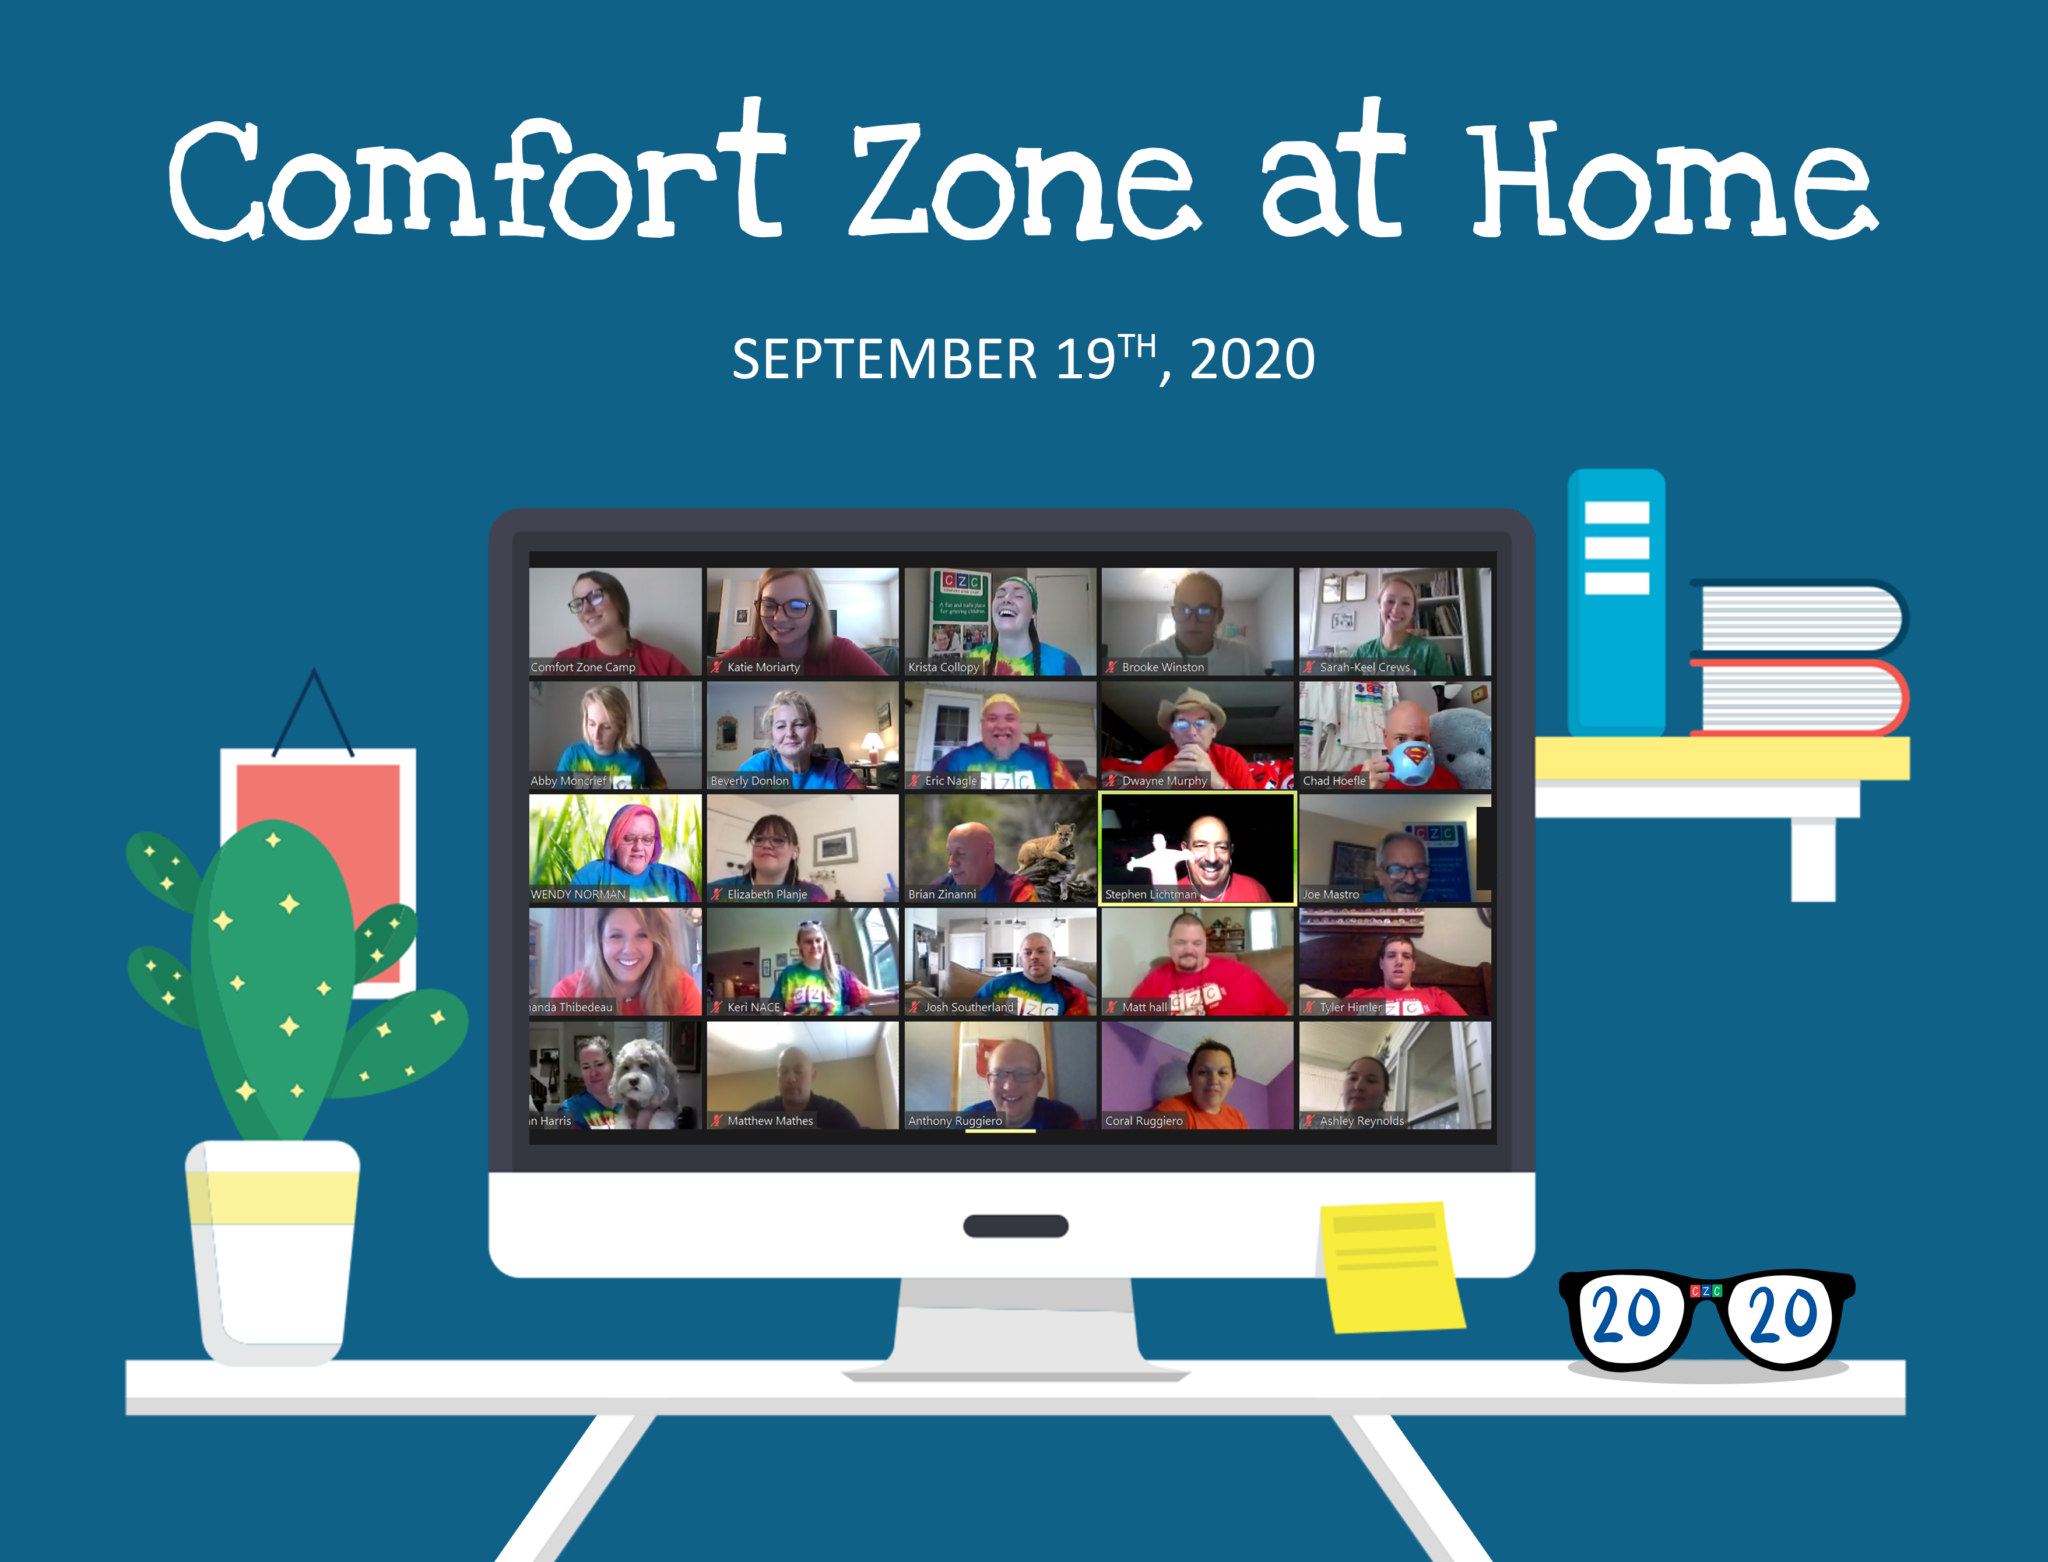 Comfort Zone at Home Comfort Zone Camp